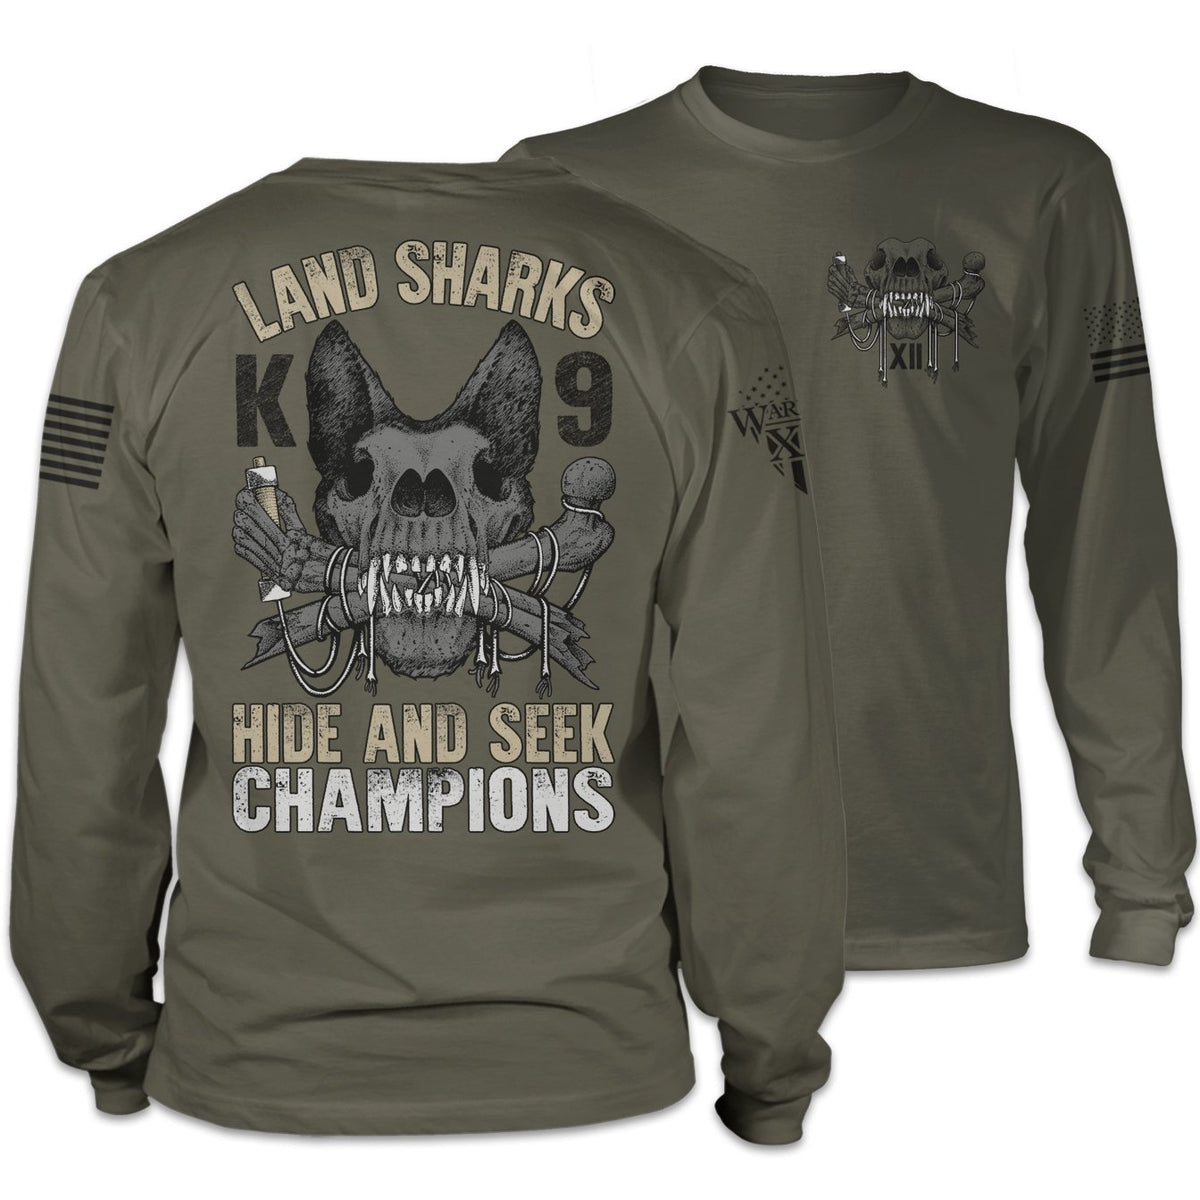 Front & back olive green long sleeve shirt with the words "land shark" and a the skeleton of k9 police dog printed on the shirt.